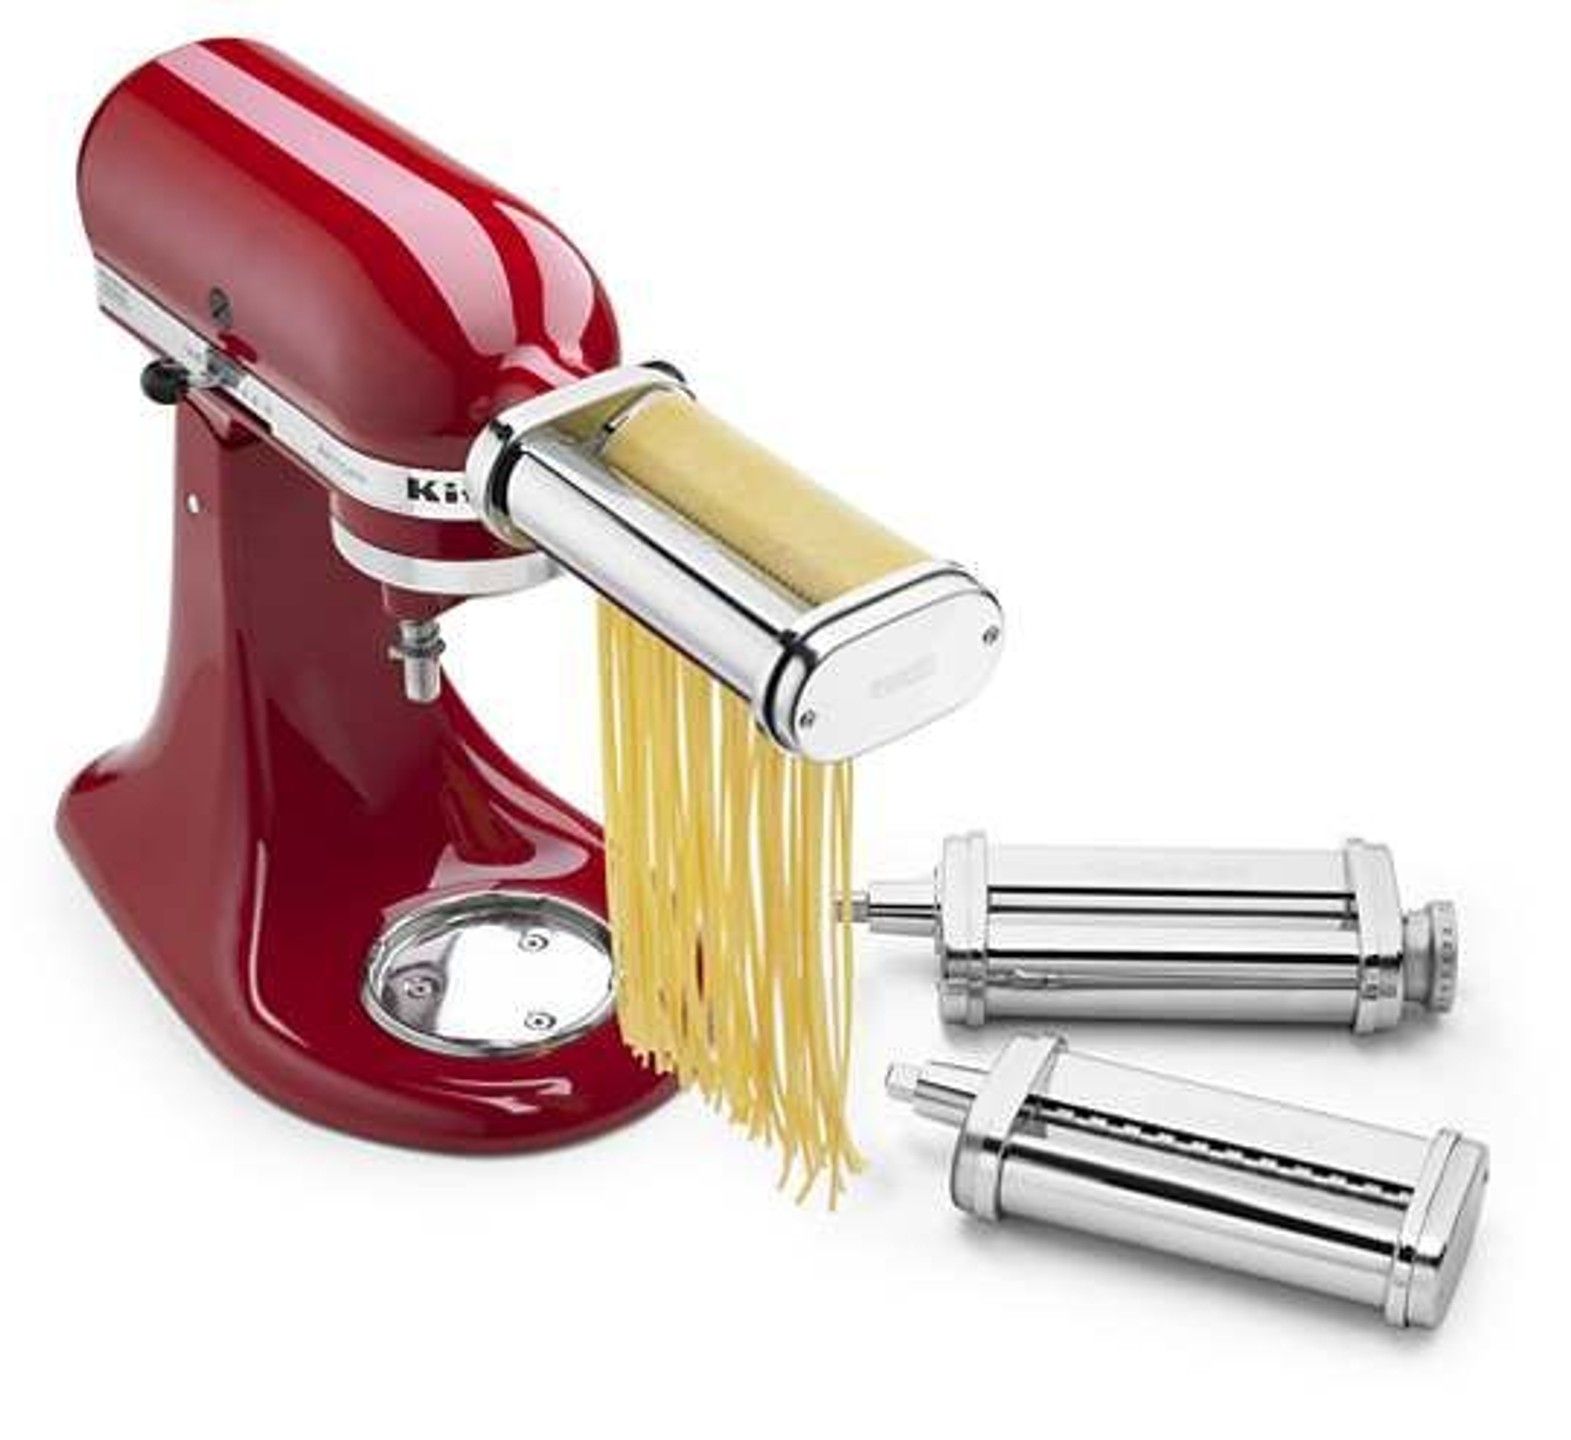 KitchenAid Pasta Roller and Cutter Stand Mixer Attachment